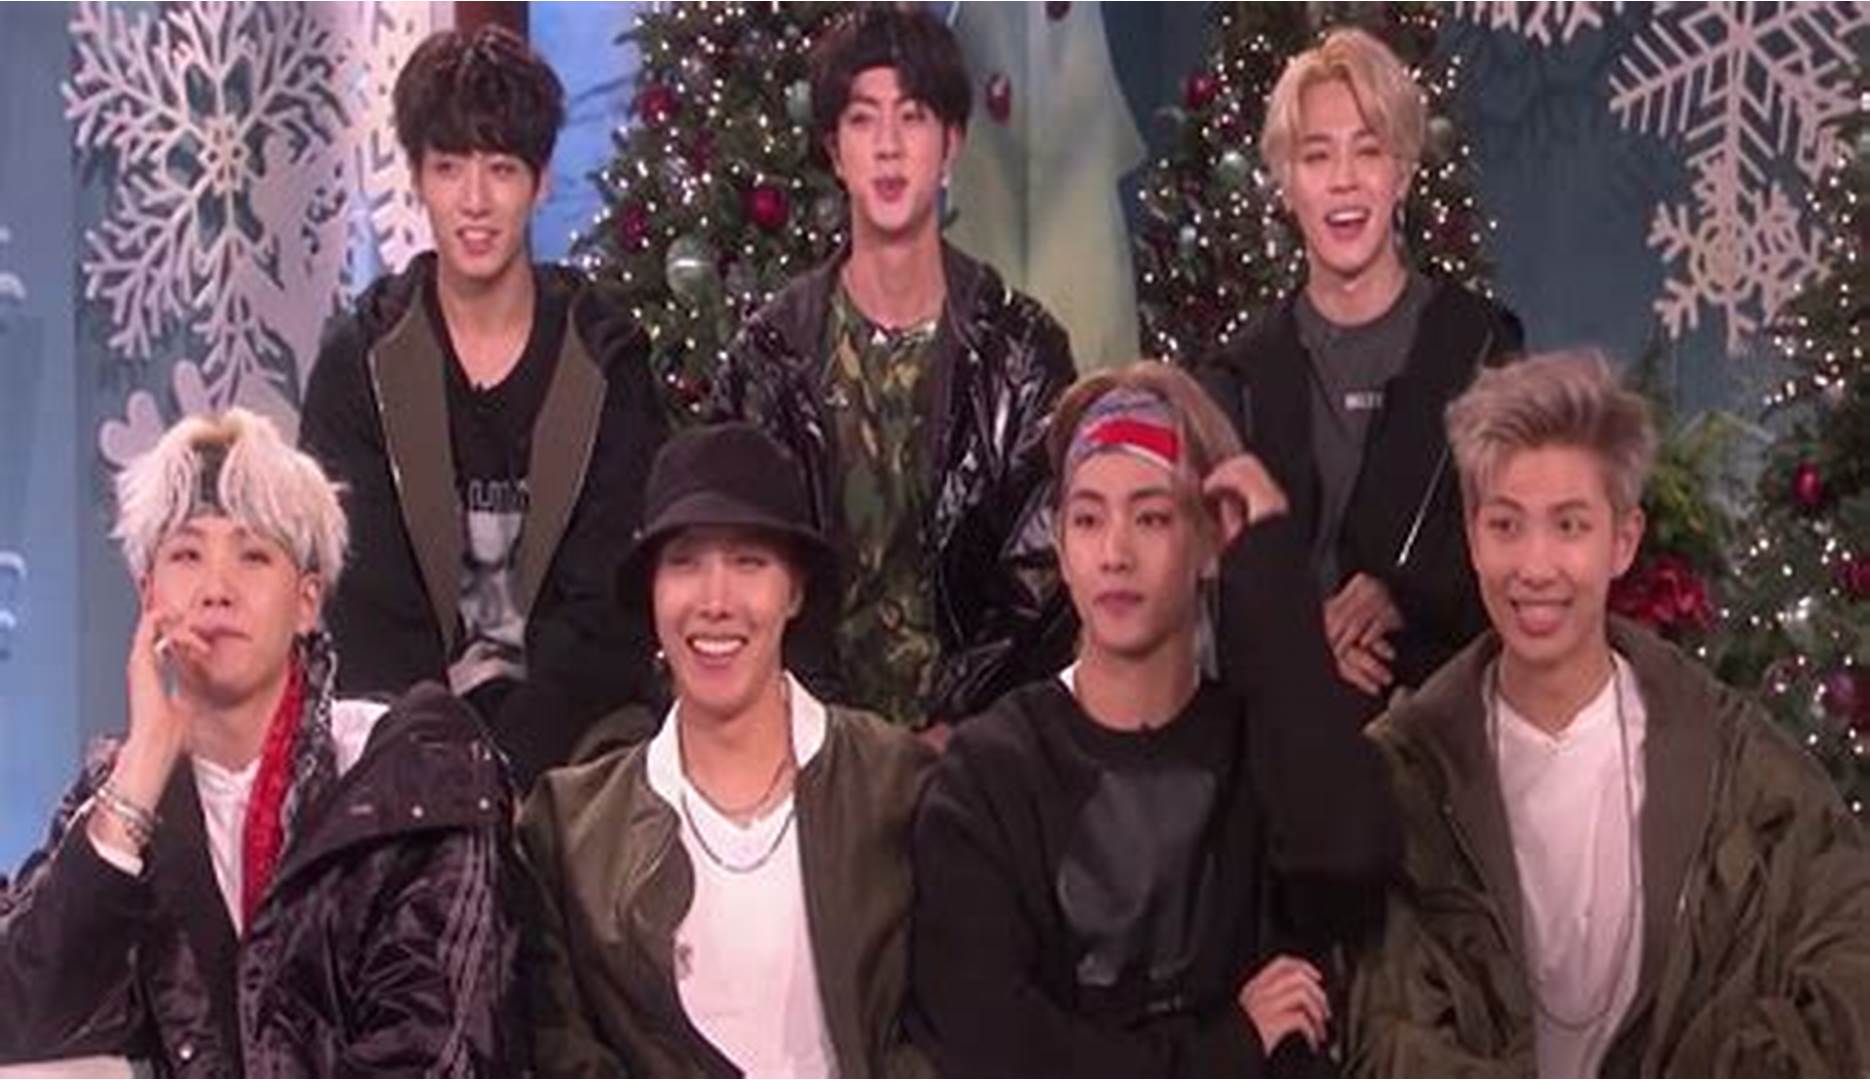 bts 8th member outfits christmas